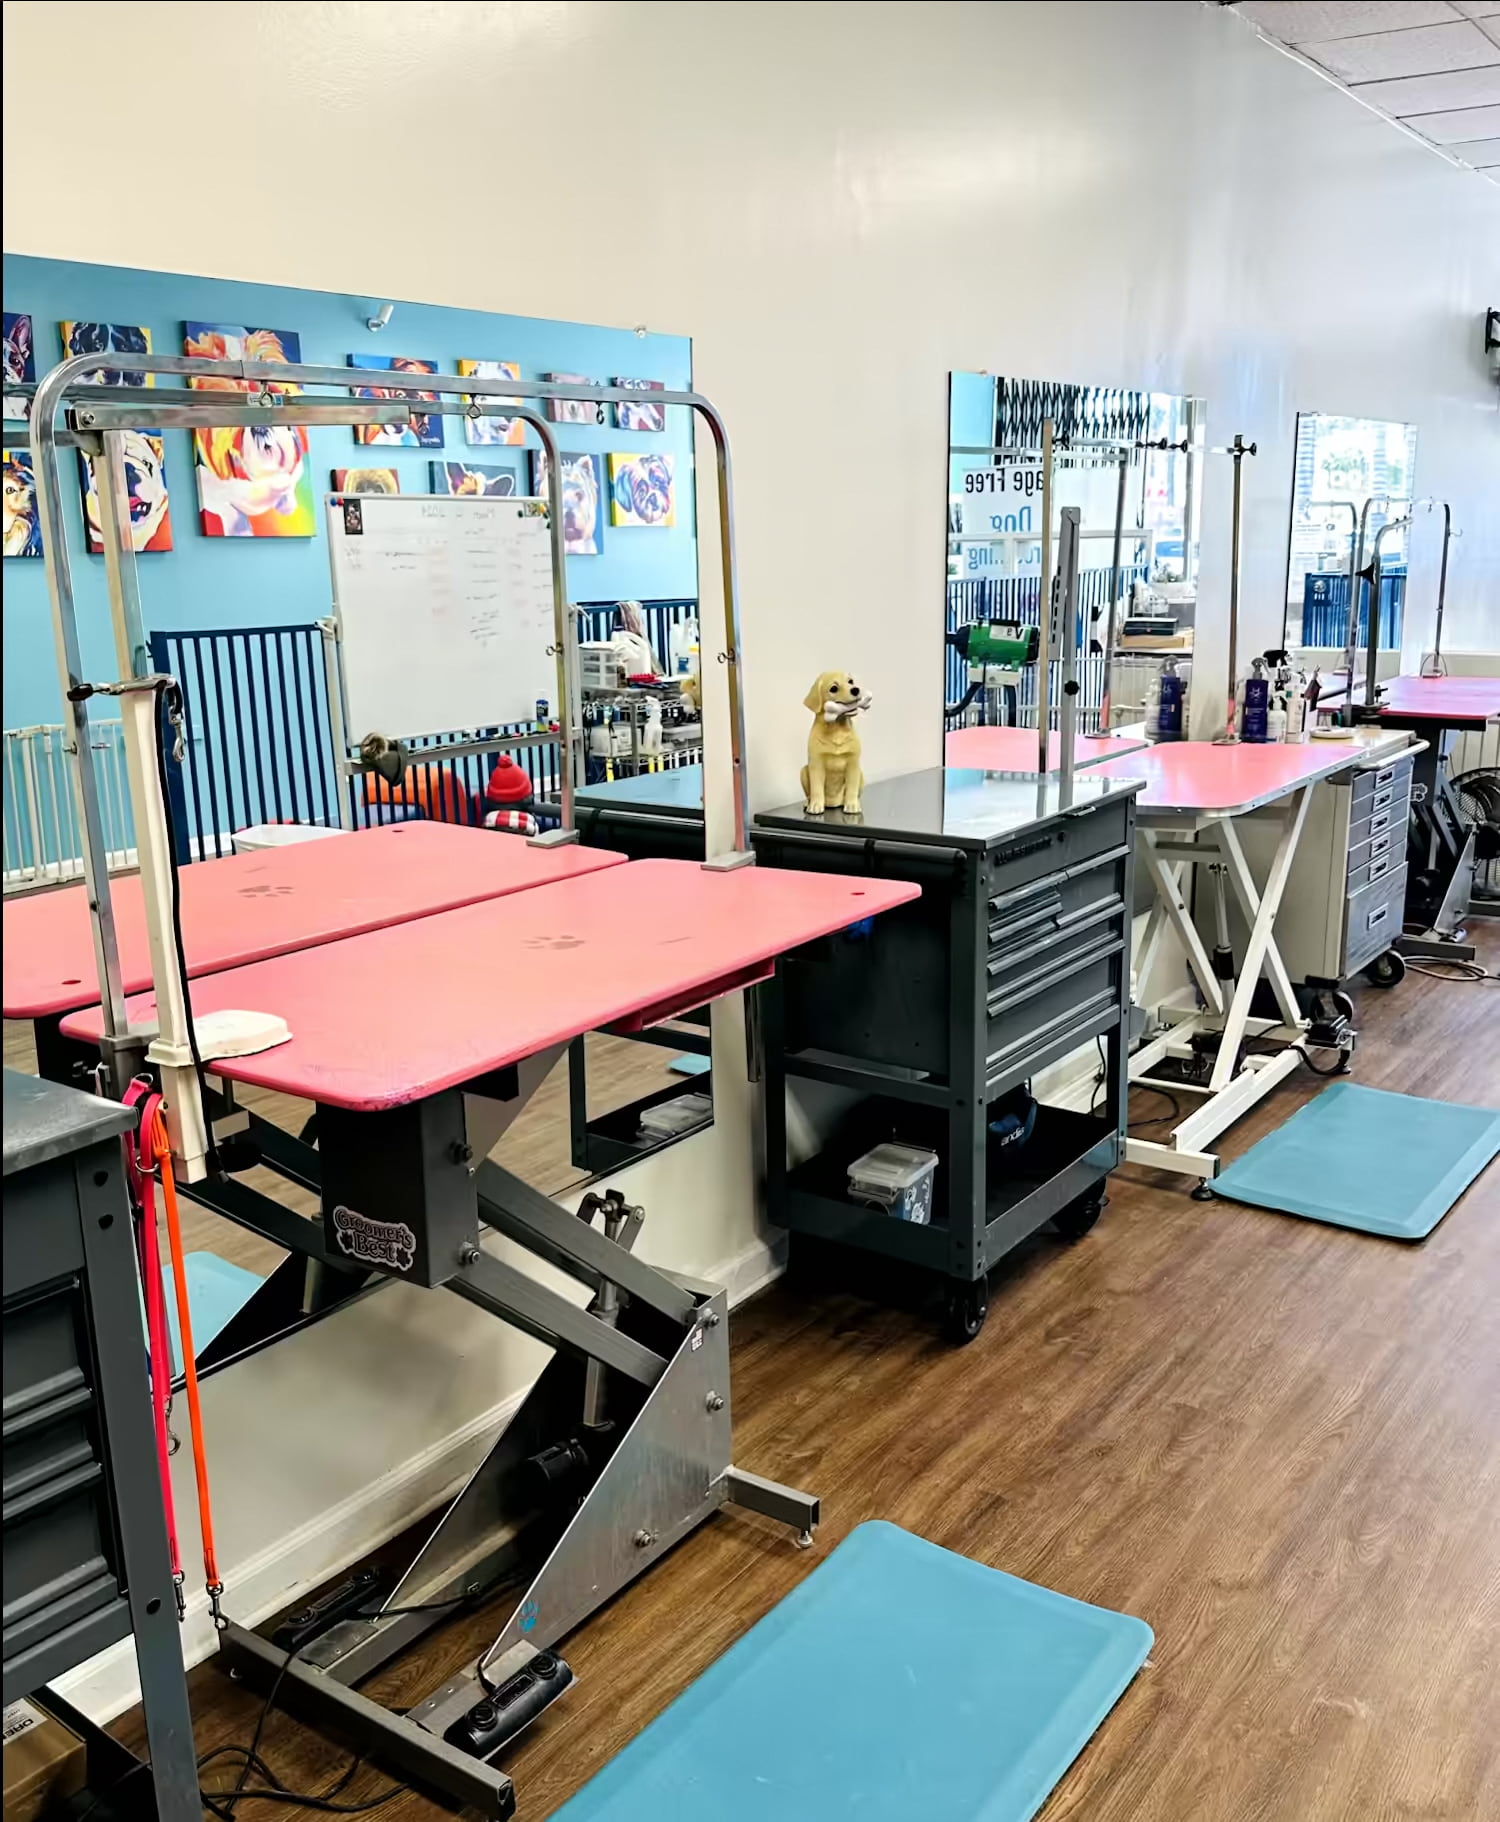 Interior photo of Tali Tails Dog Grooming and Daycare, showing three pink dog grooming tables with mirrors and dog themed artwork on the wall. It is spacious and clean.